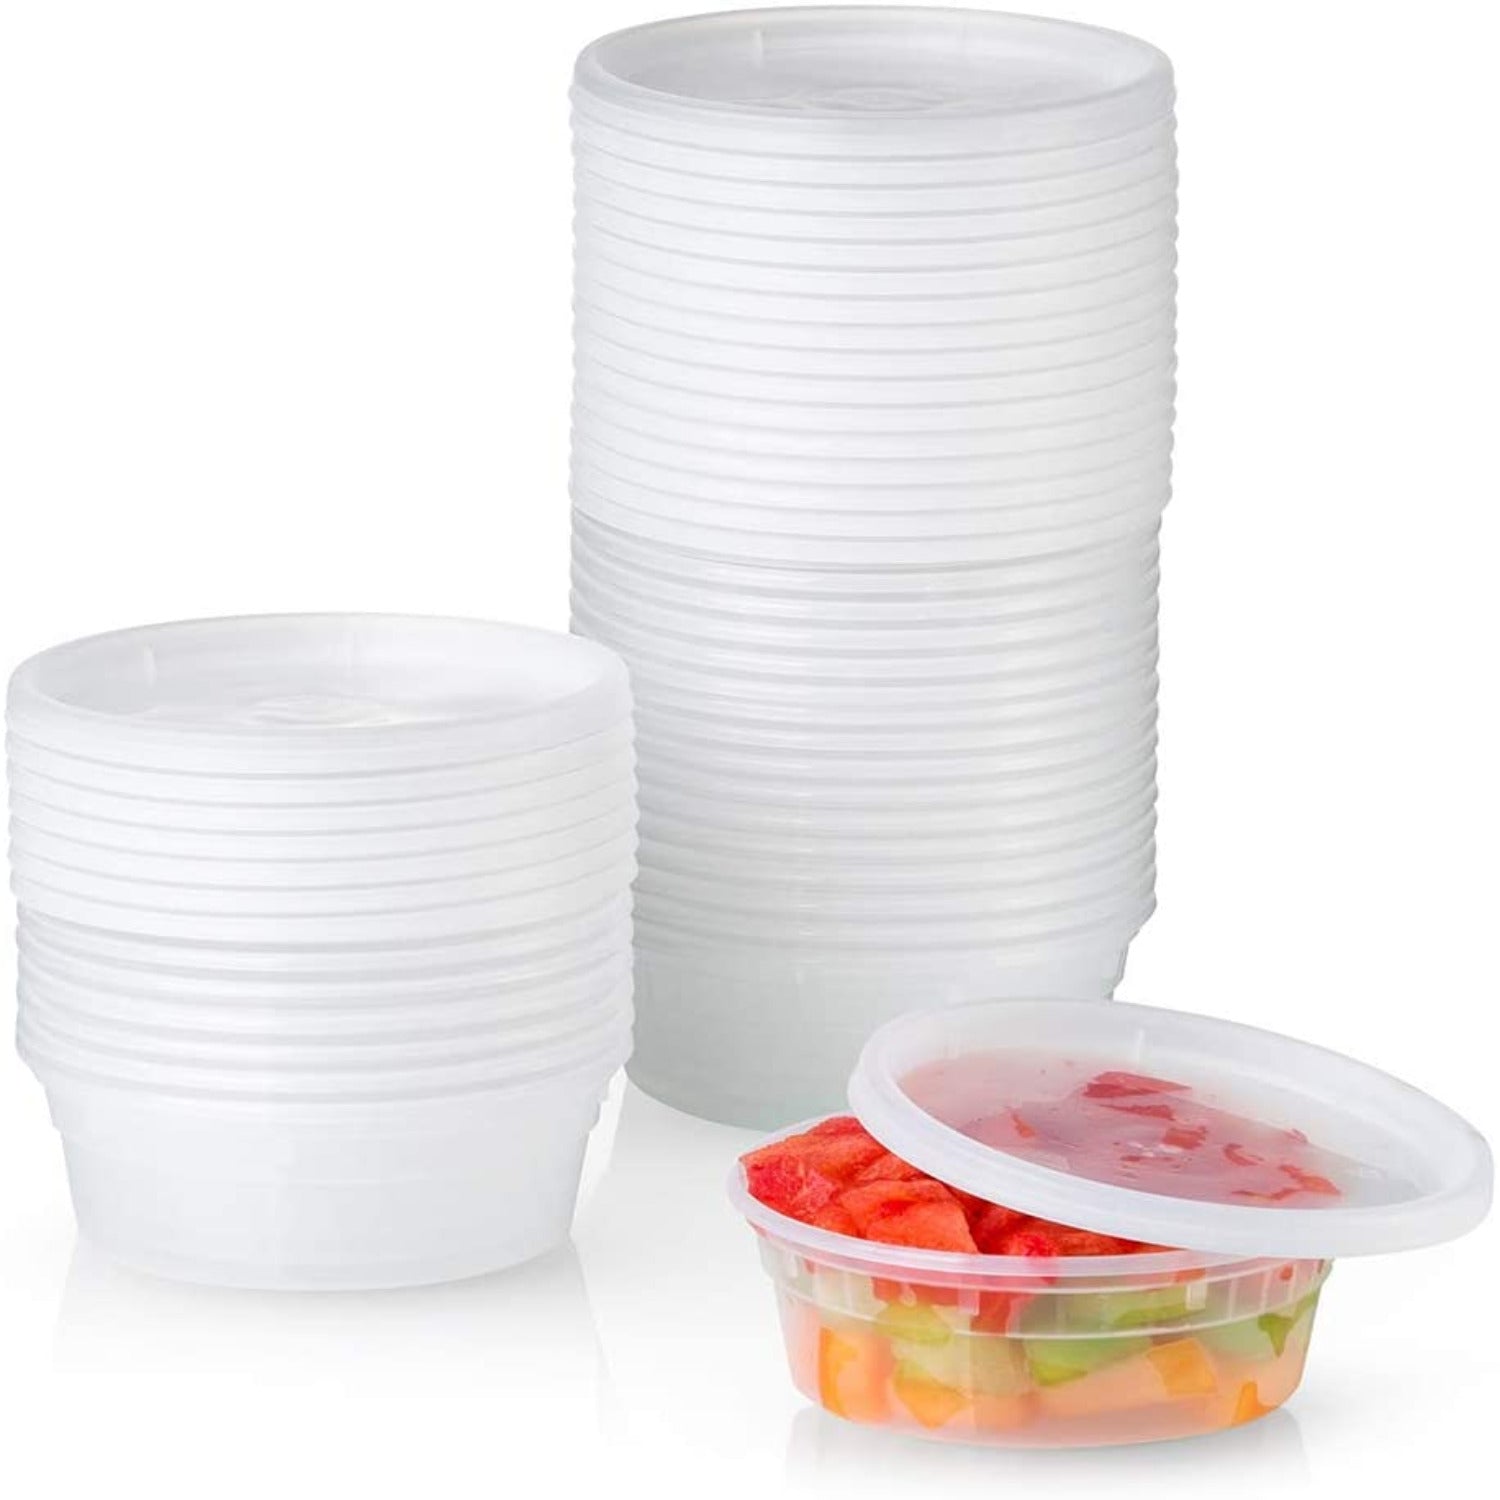 (24 Pack) 32 oz Plastic Soup Containers with Lids, Heavy Duty Deli Food  Storage/Take Out Containers, Microwavable, Leakproof